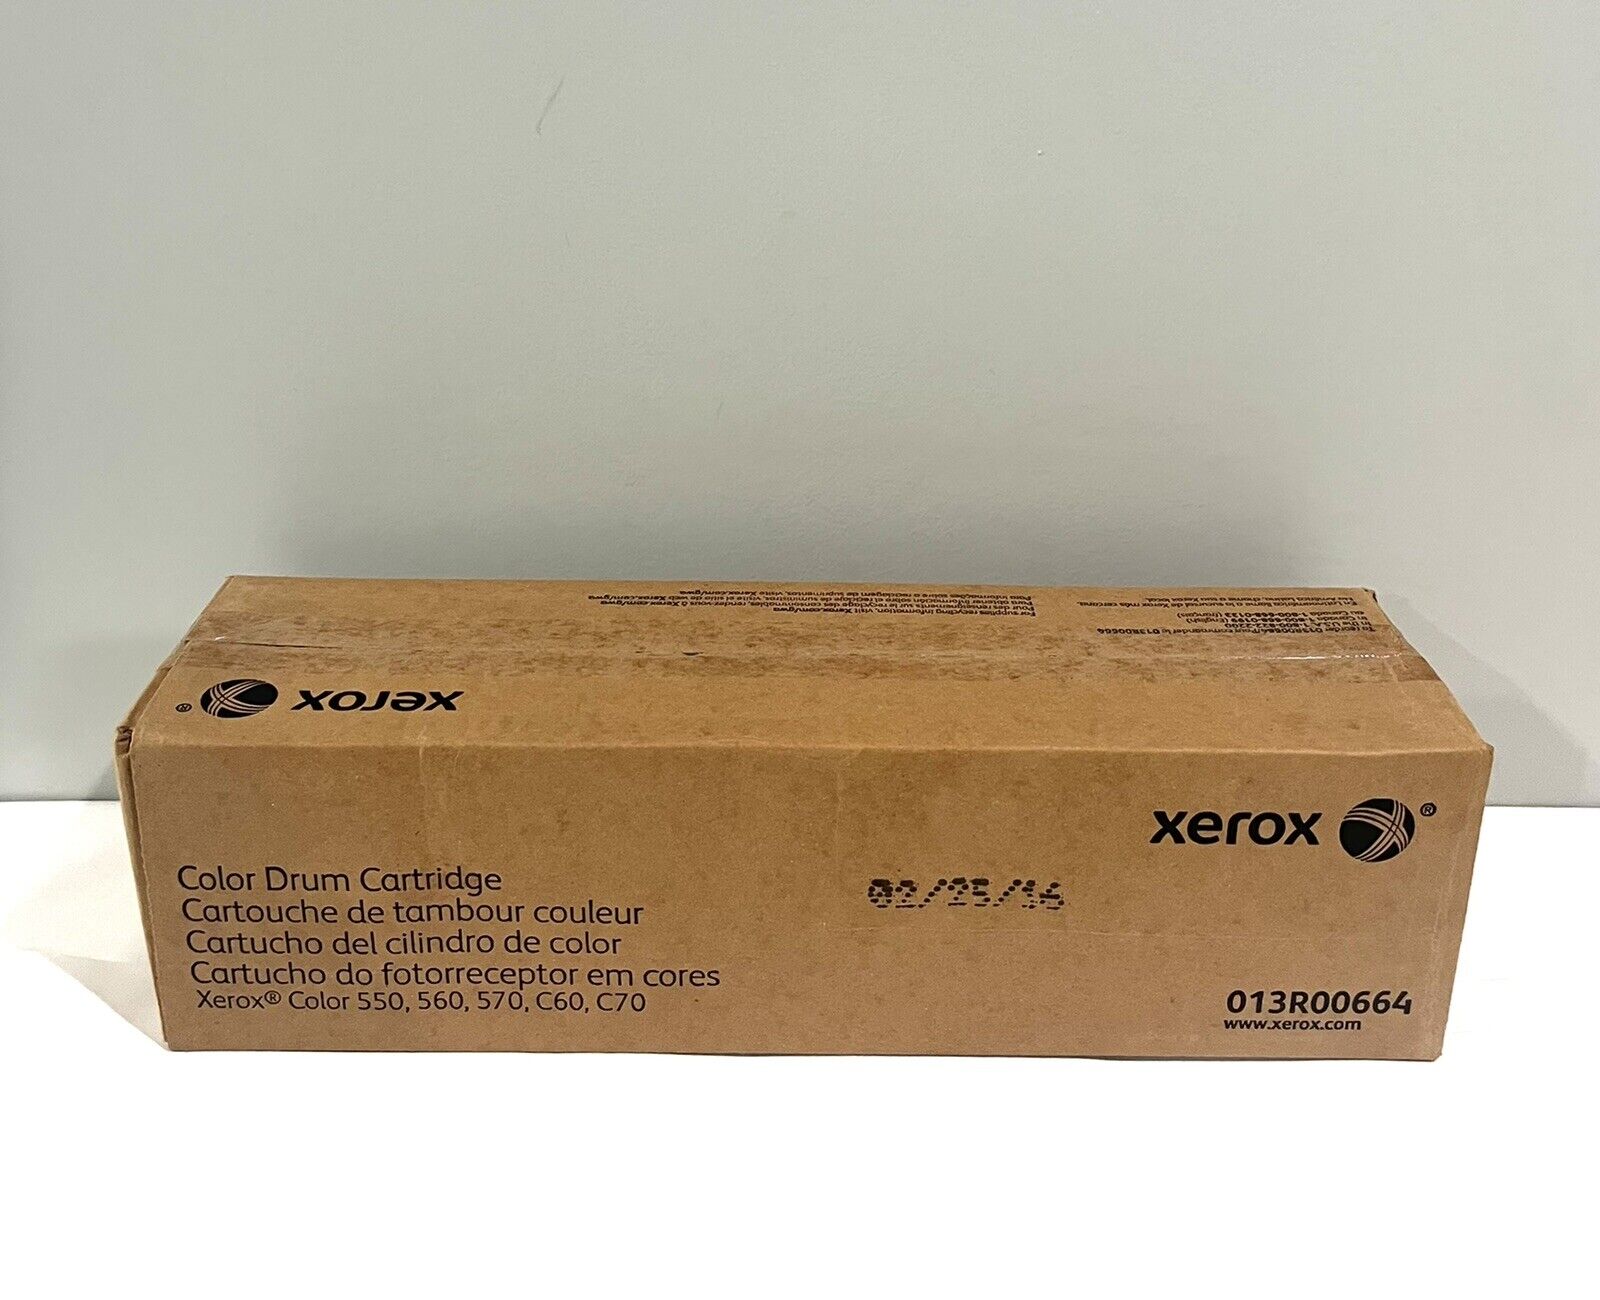 Xerox 013R00664 Color Drum Unit for use with Xerox color 550,560,570,C60,C70 